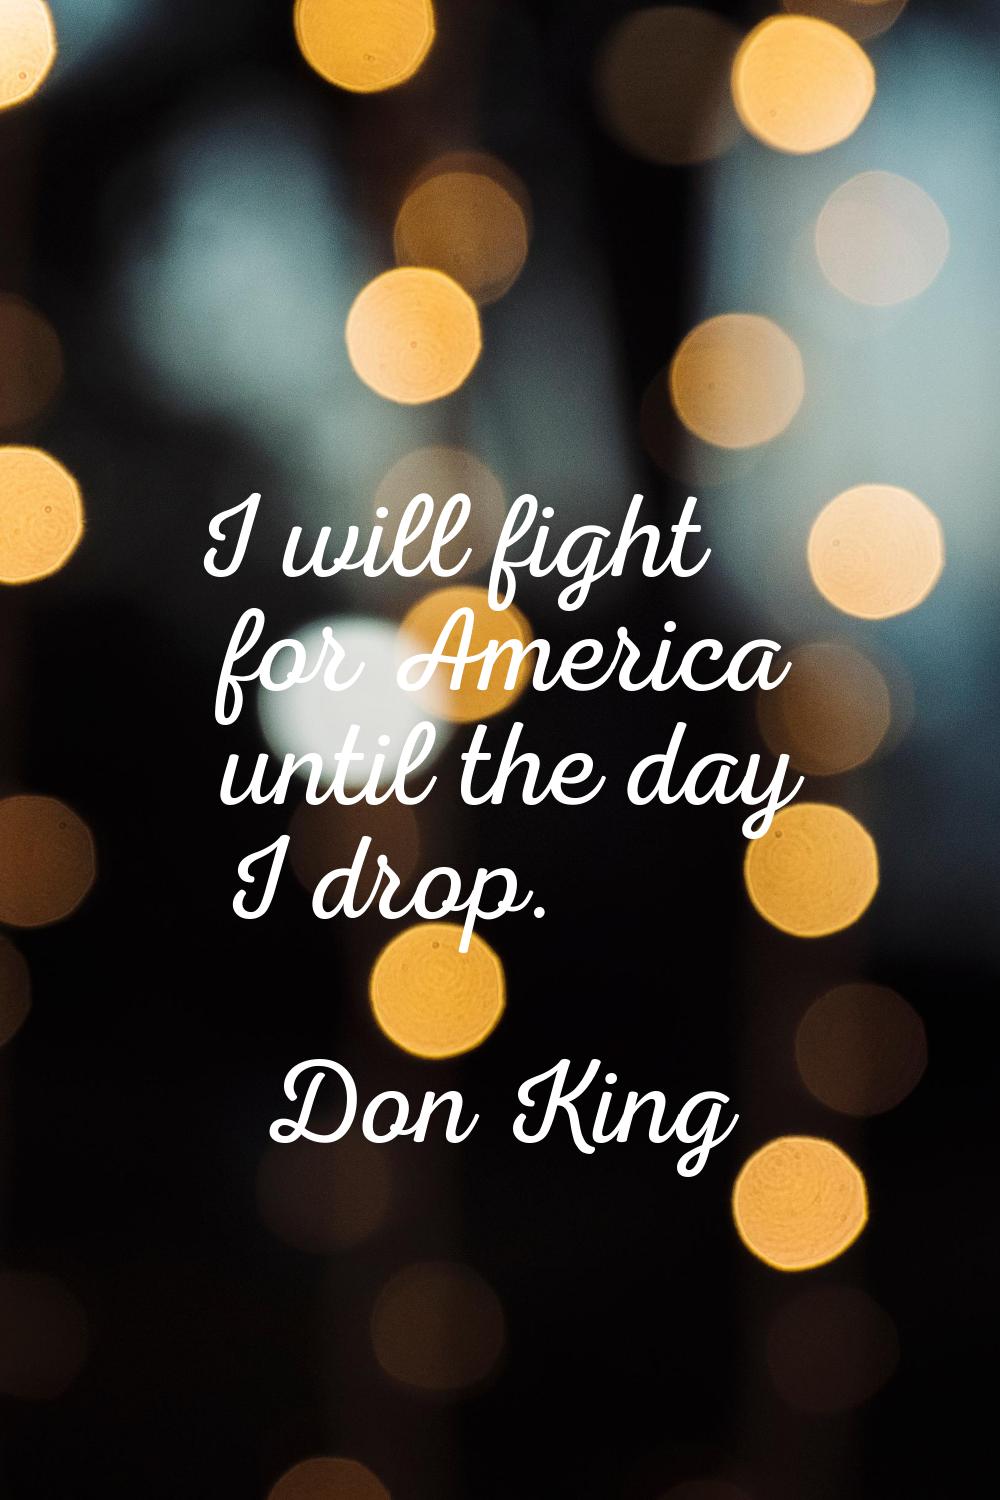 I will fight for America until the day I drop.